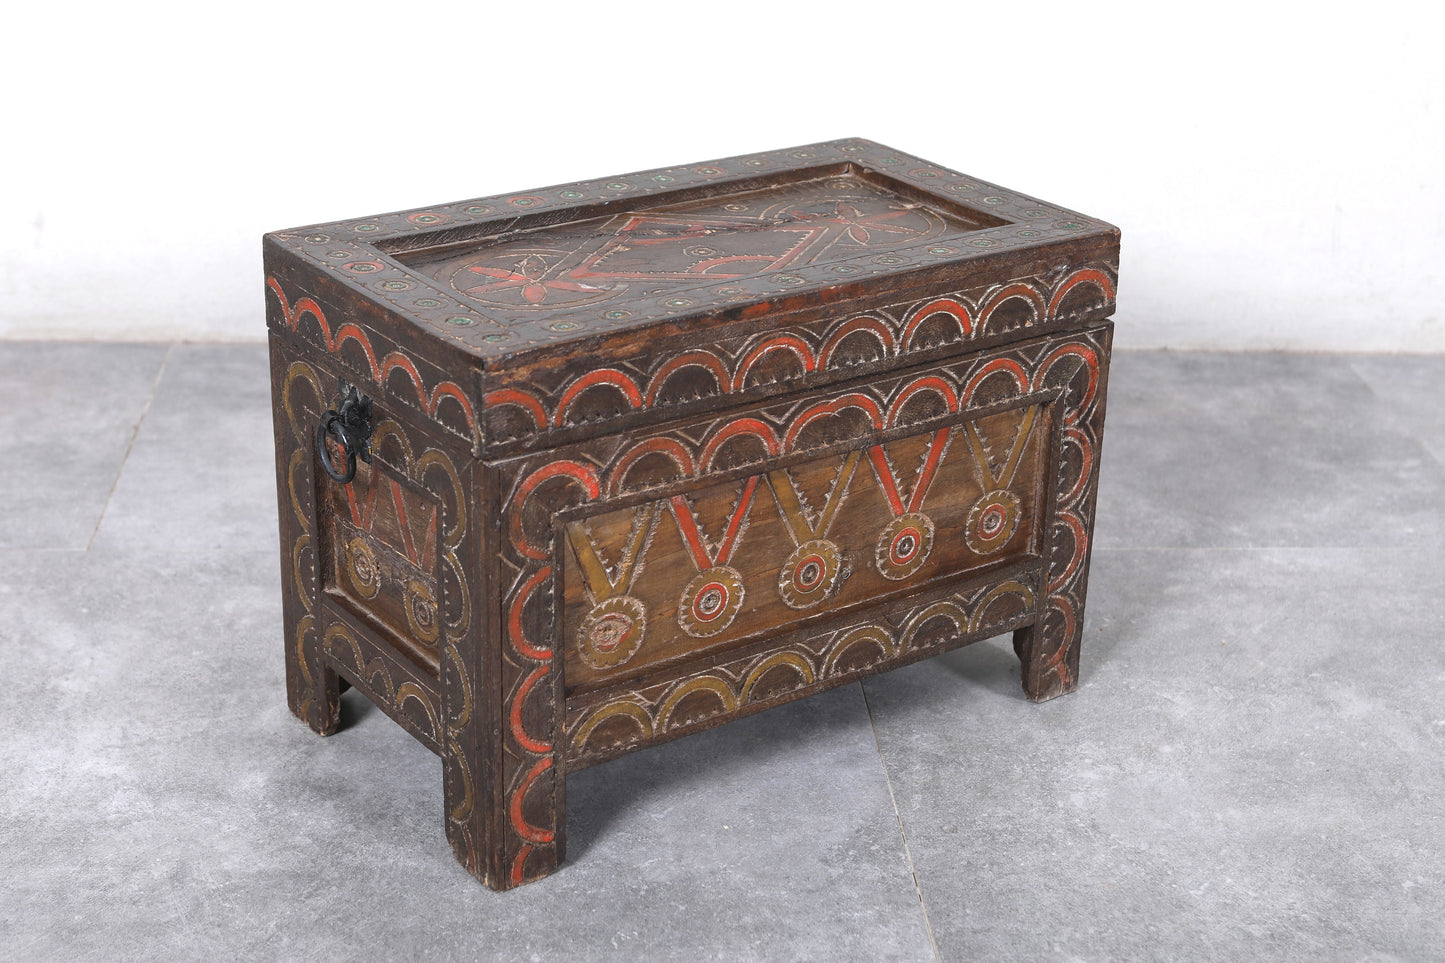 Vintage Moroccan chest  H 13.7 INCHES X W 19.8 INCHES X D 11.4 INCHES